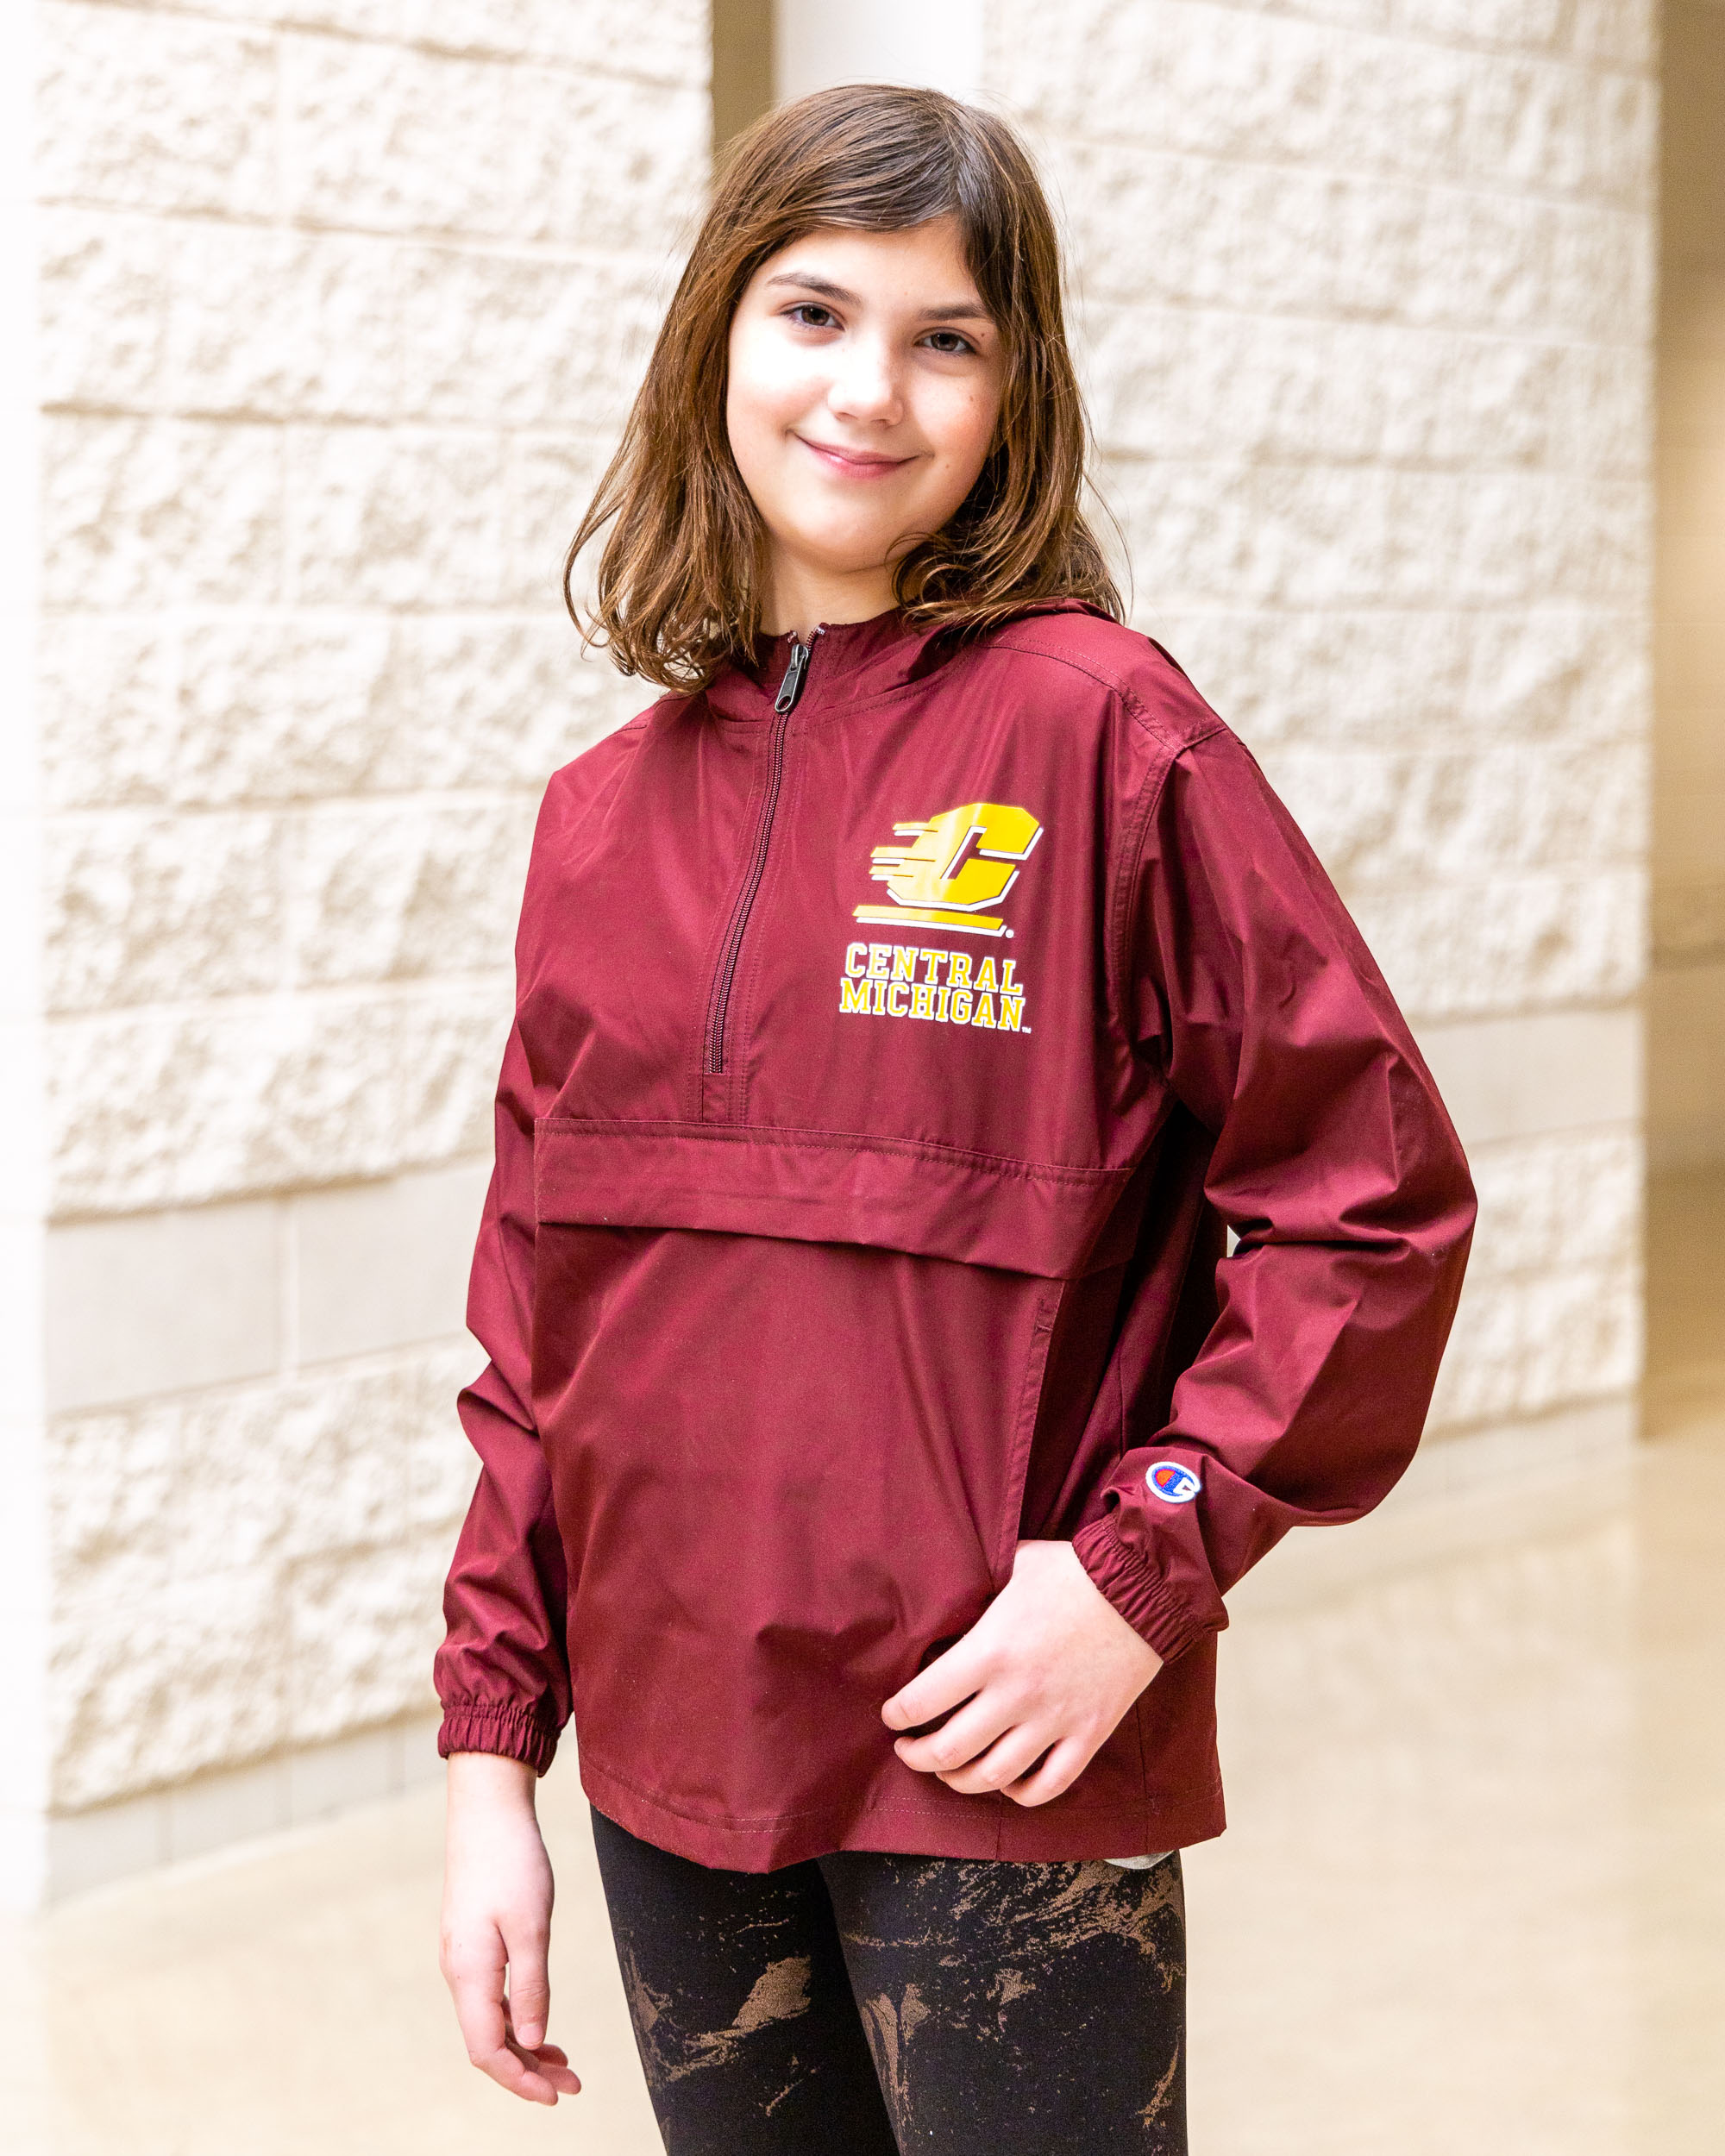 Action C Central Michigan Maroon Youth Packable Hooded Jacket